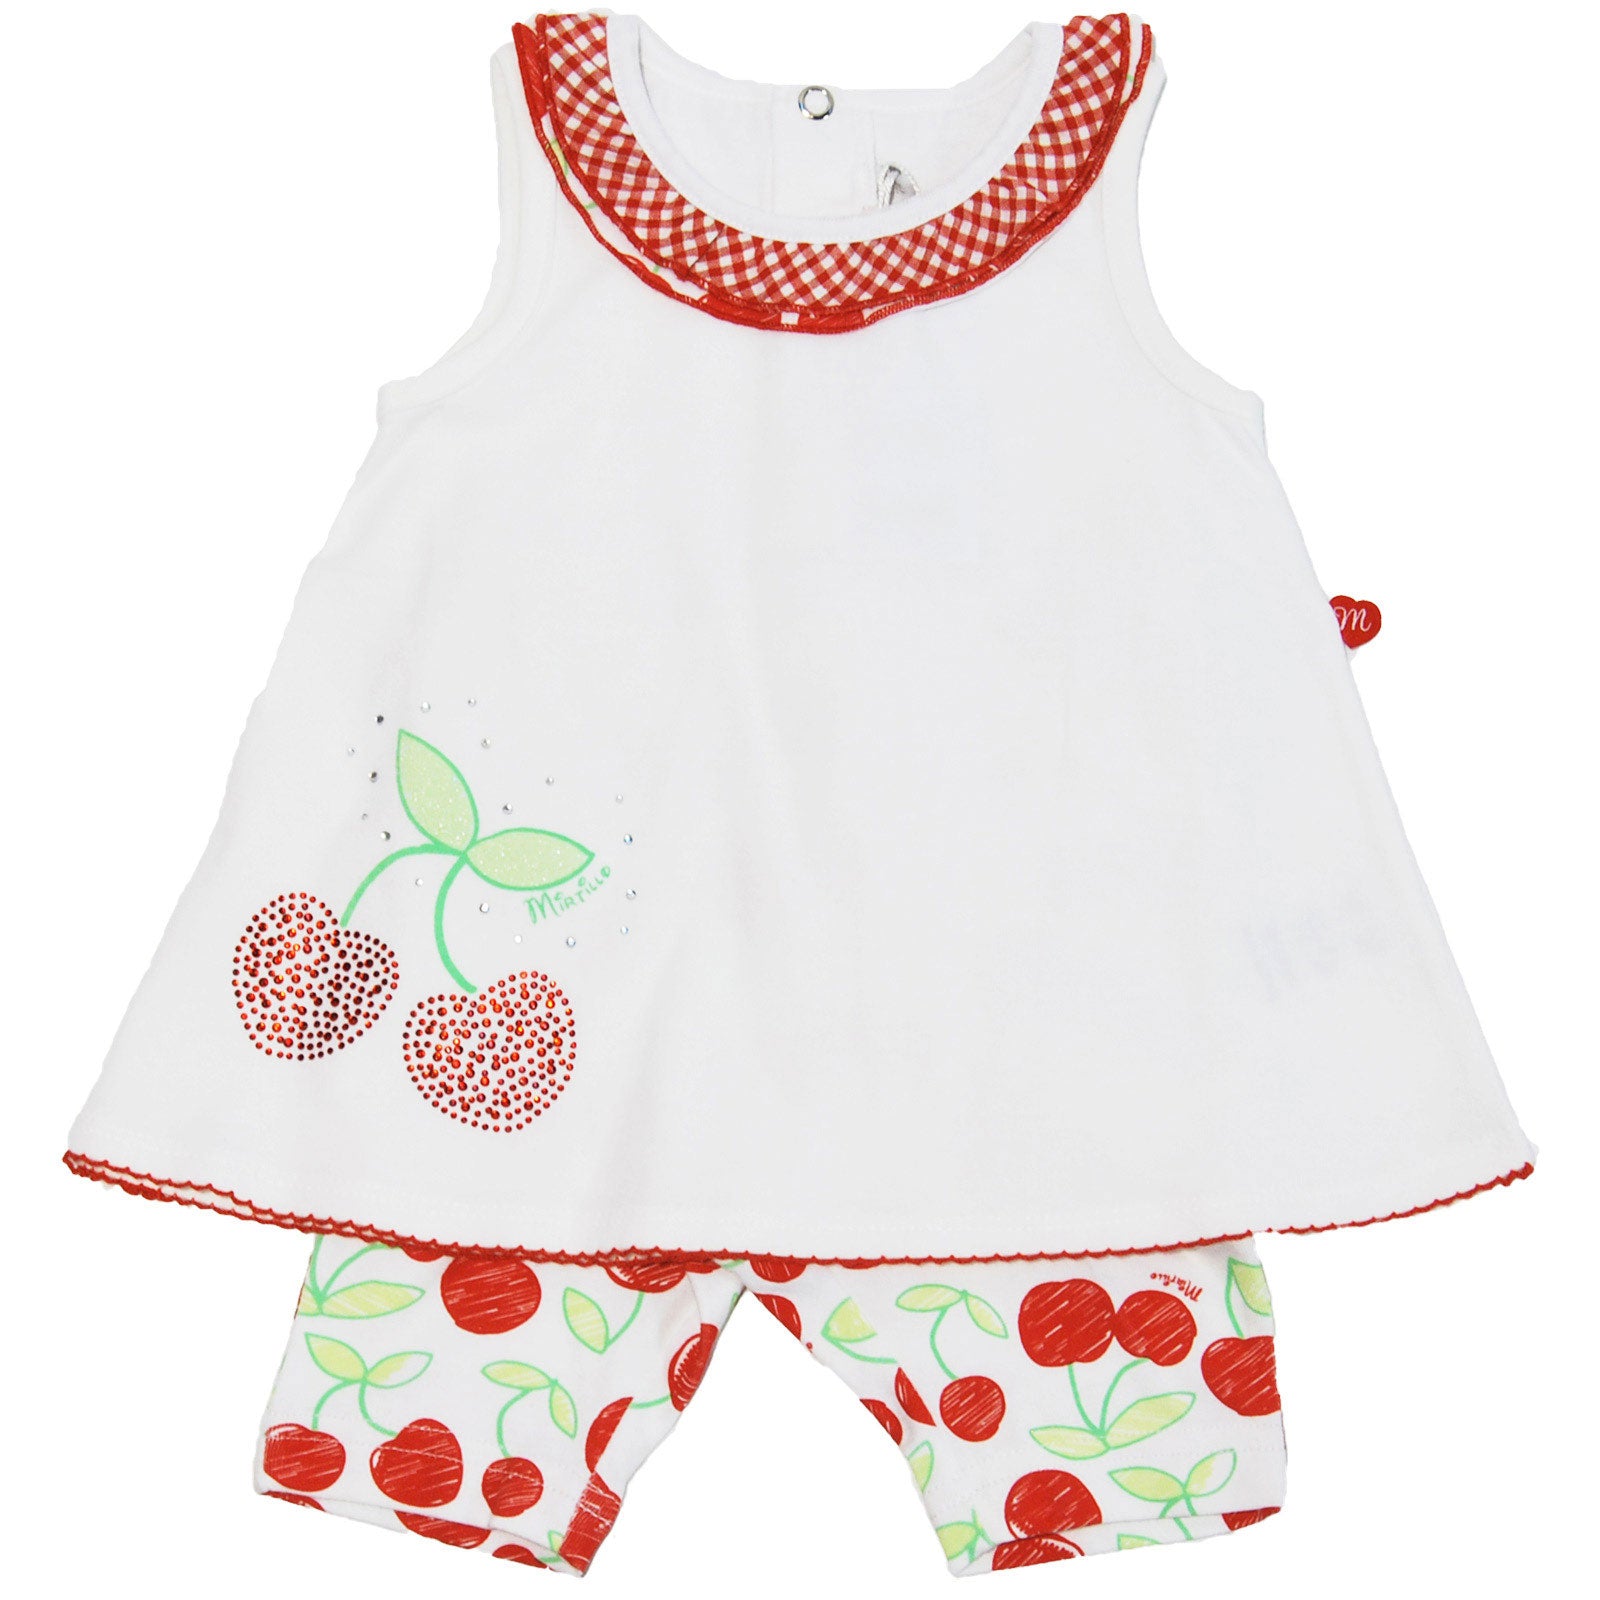 
  2-piece cotton jersey set from the girls' clothing line Mirtillo.
  Tank top with rhinestones ...